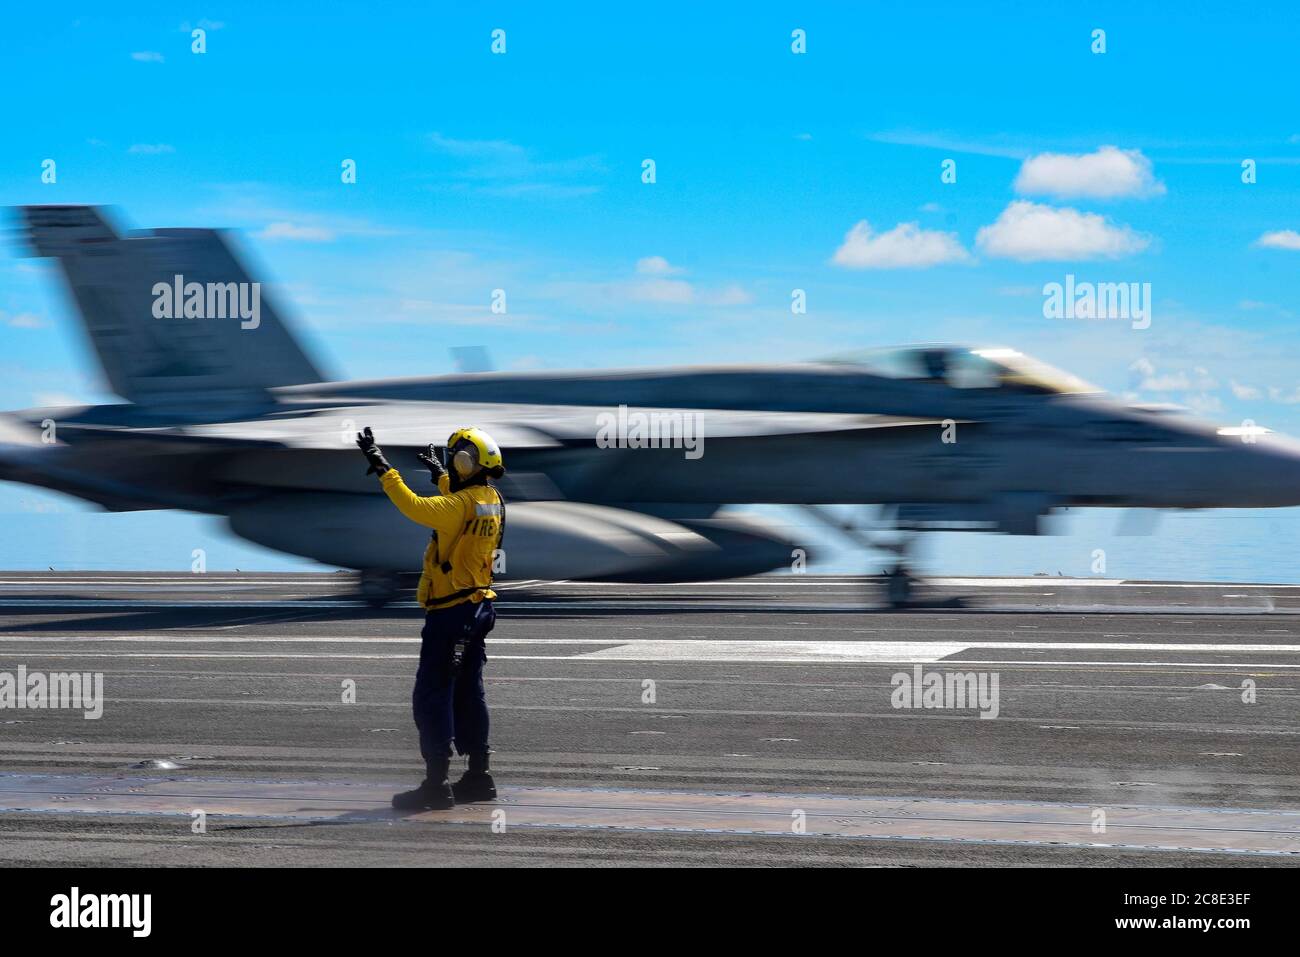 A U.S. Navy deck crew member signals a F/A-18E Super Hornet fighter aircraft, attached to Eagles of Strike Fighter Squadron 115, for launch on the flight deck of the Nimitz-class aircraft carrier USS Ronald Reagan July 17, 2020 underway in the South China Sea. Stock Photo